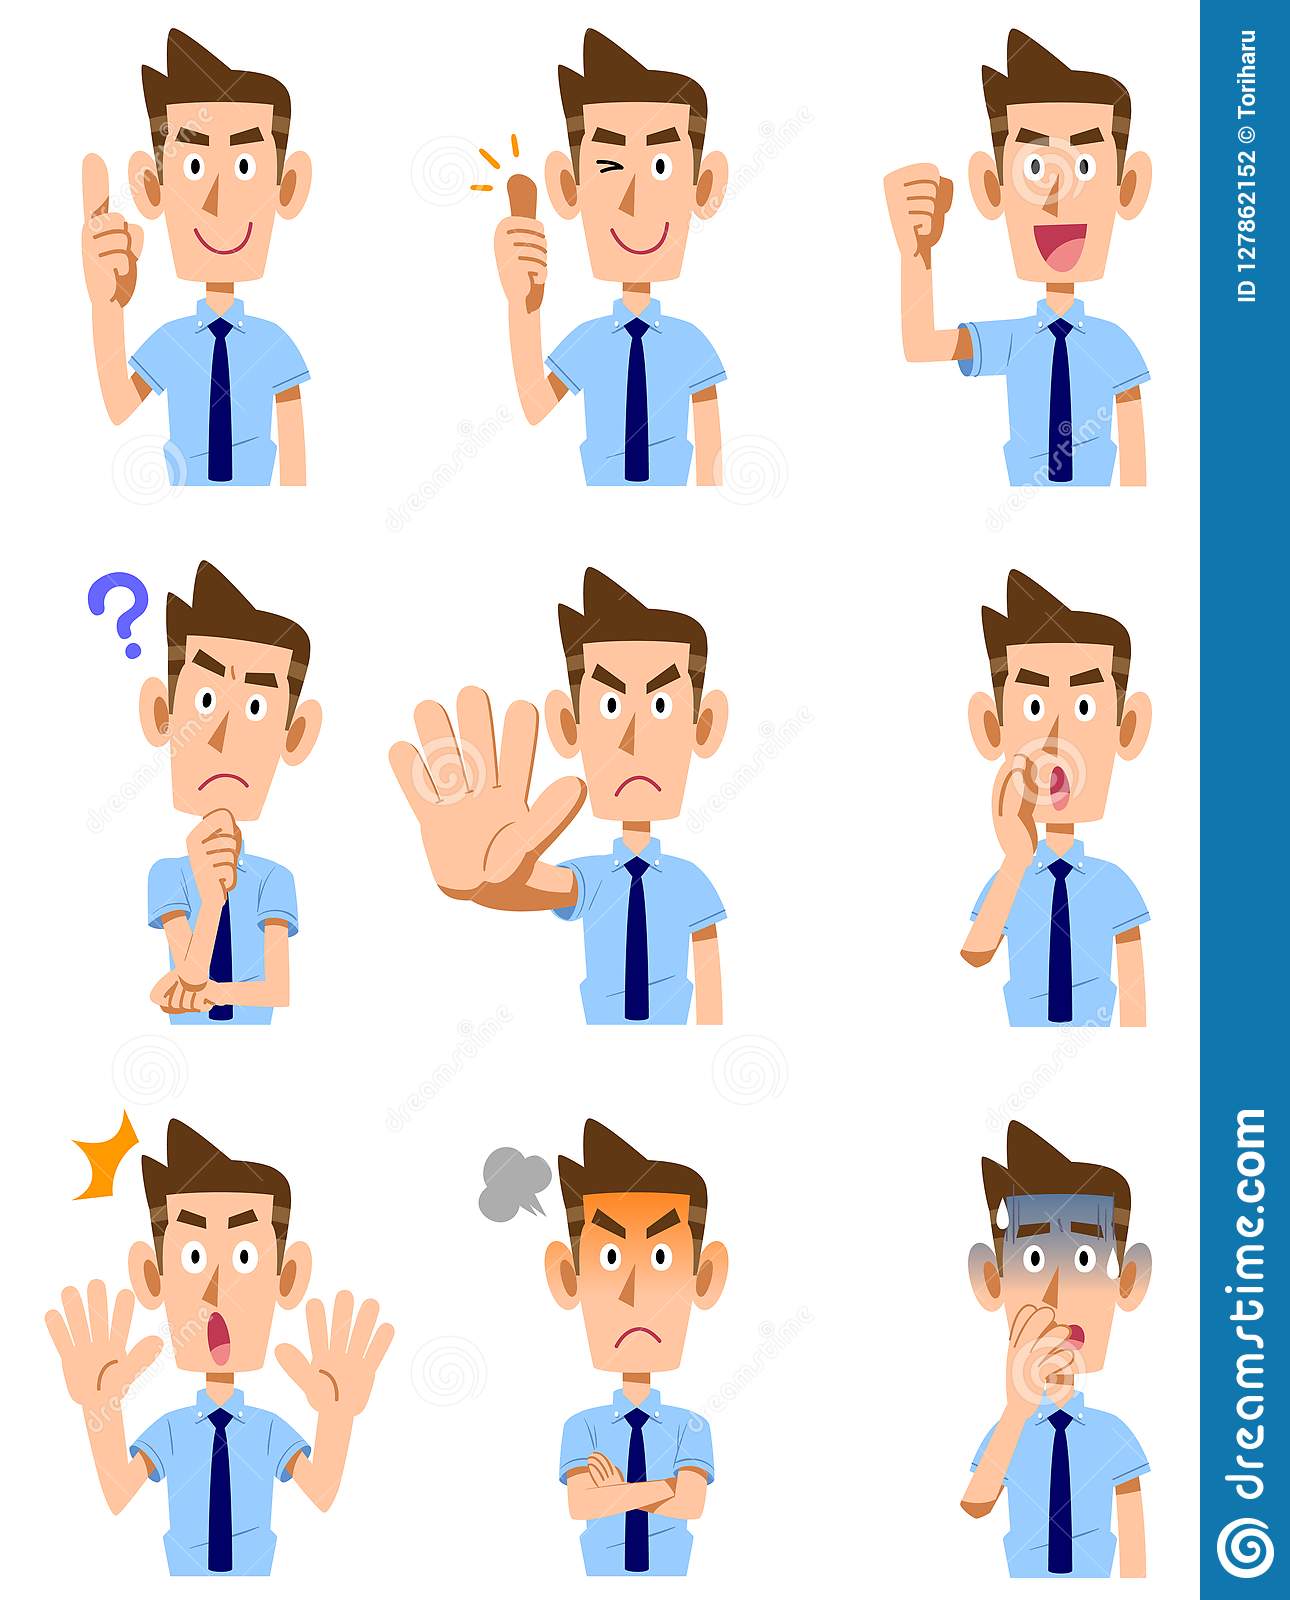 Examples of gestures